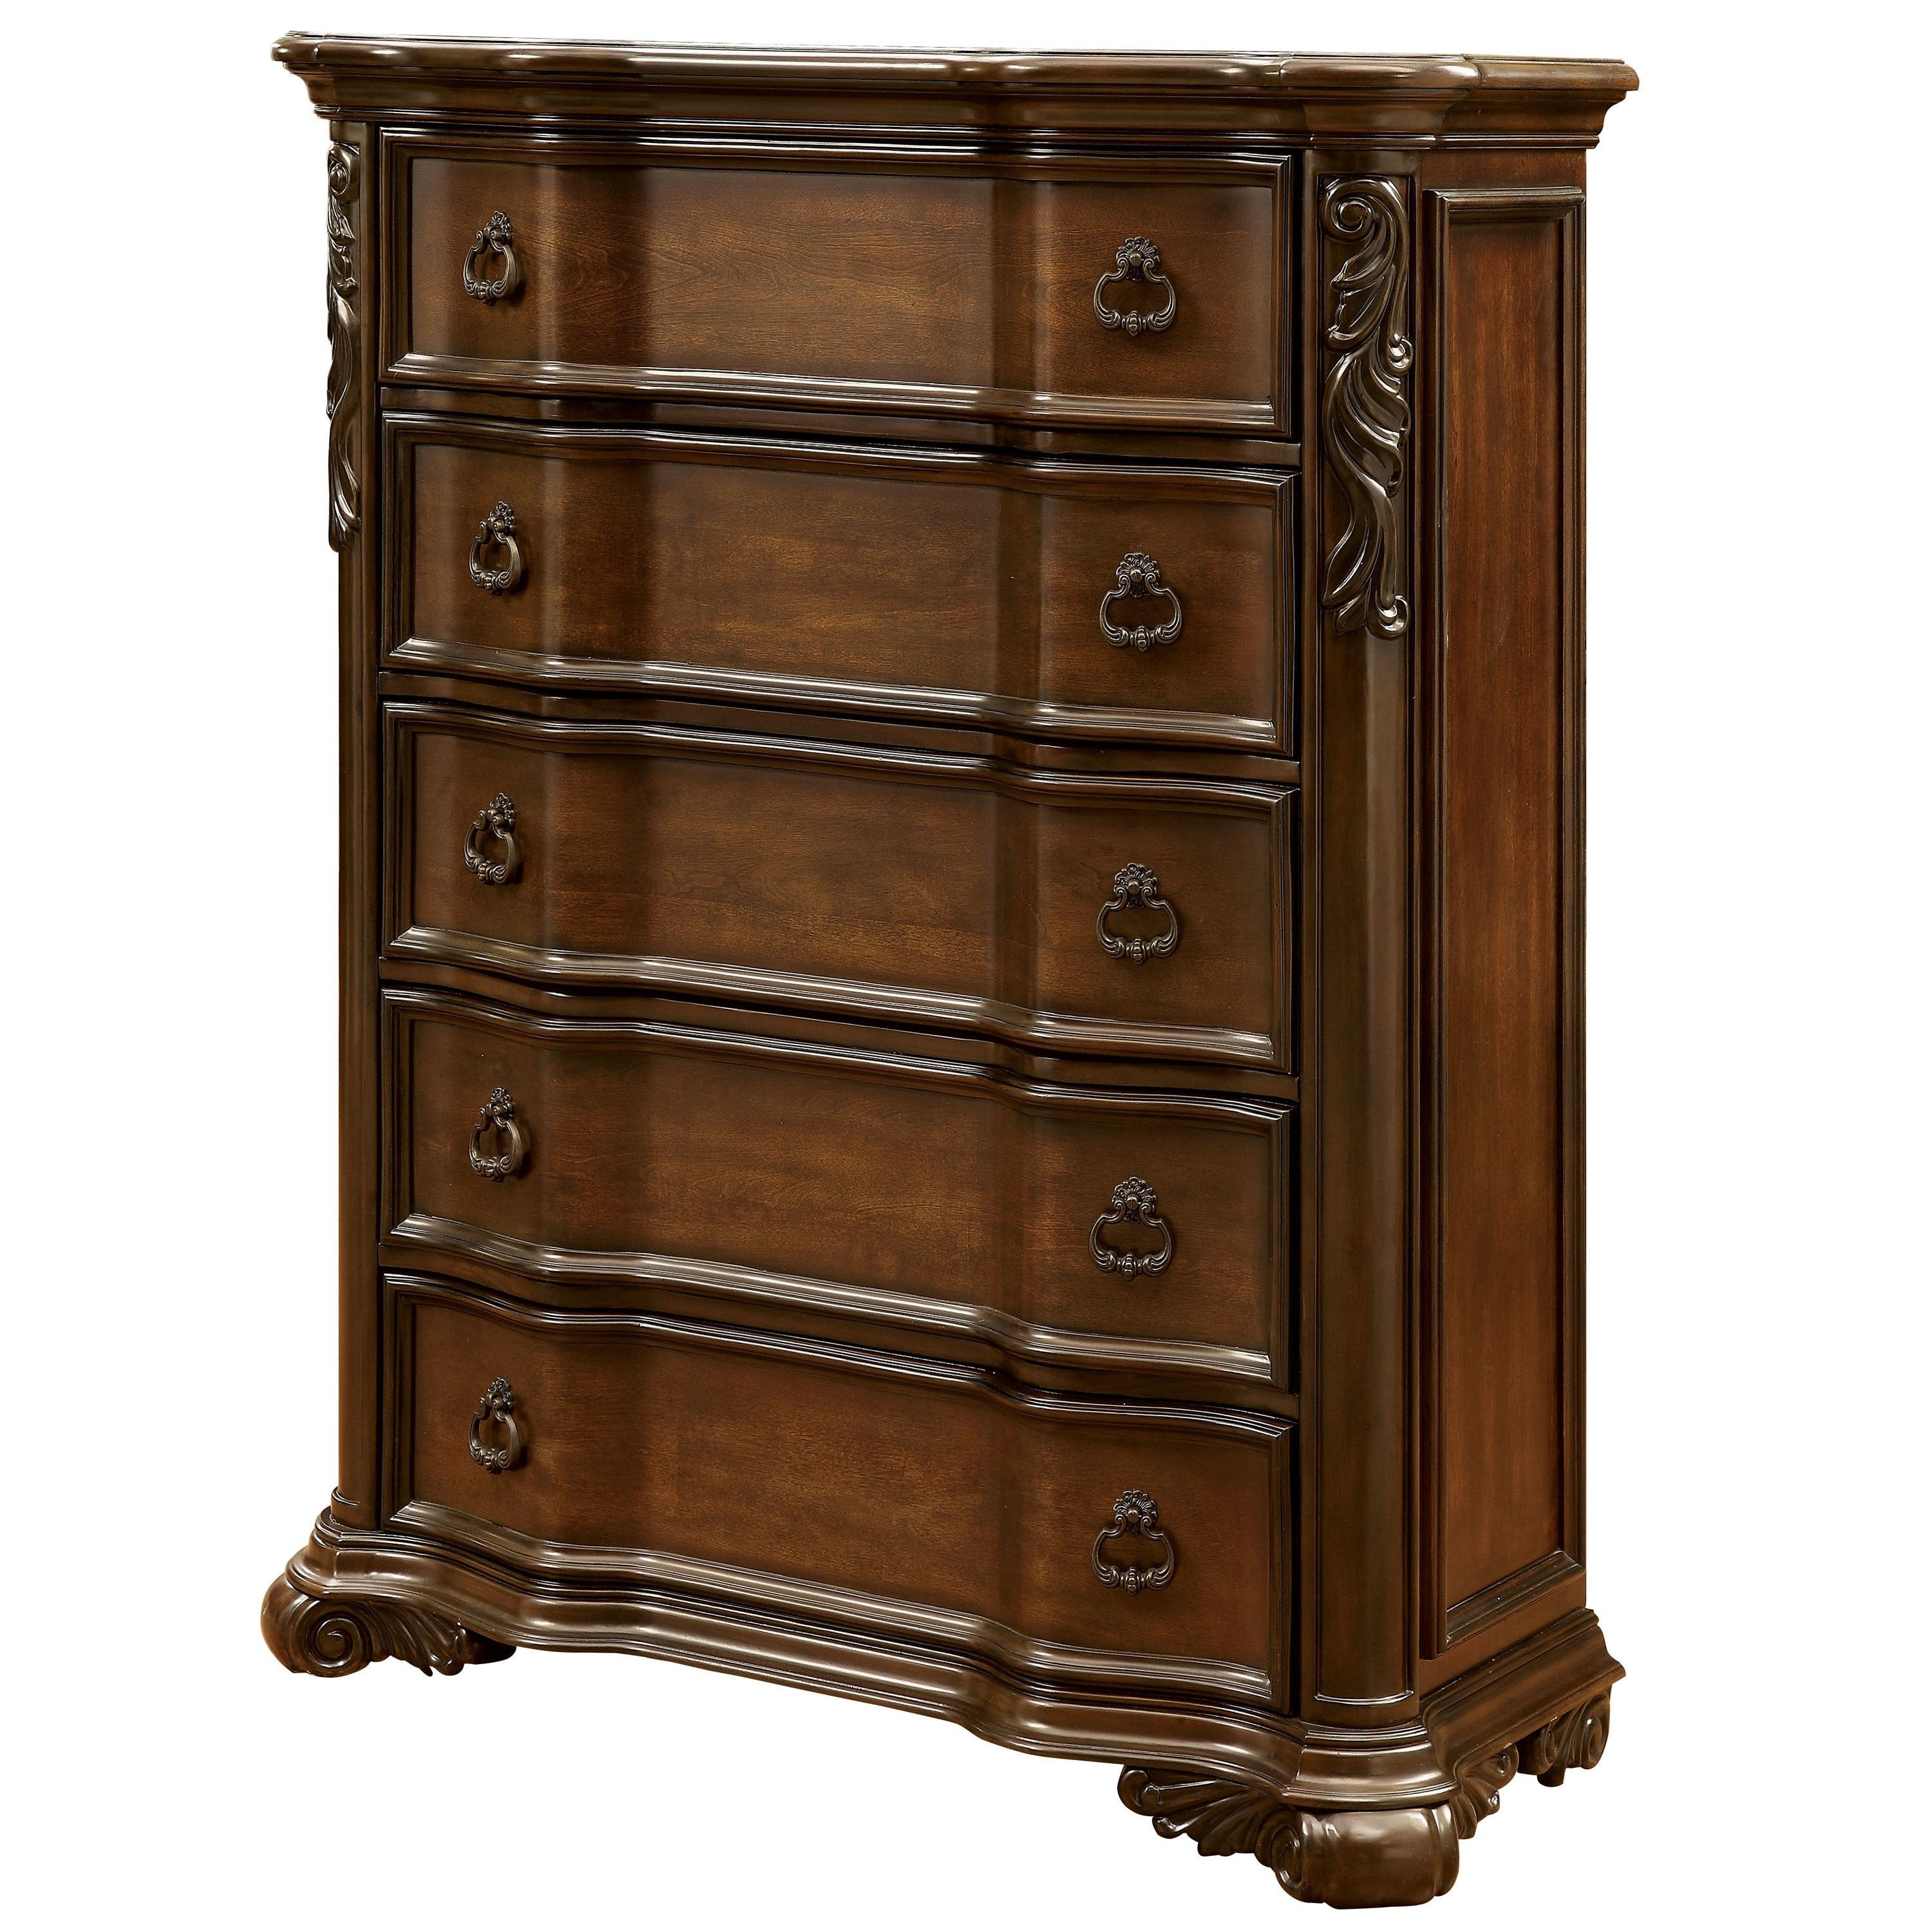 Solid Cherry Wood Bedroom Furniture Elegant Furniture Of America Hols Traditional Cherry solid Wood 5 Drawer Chest